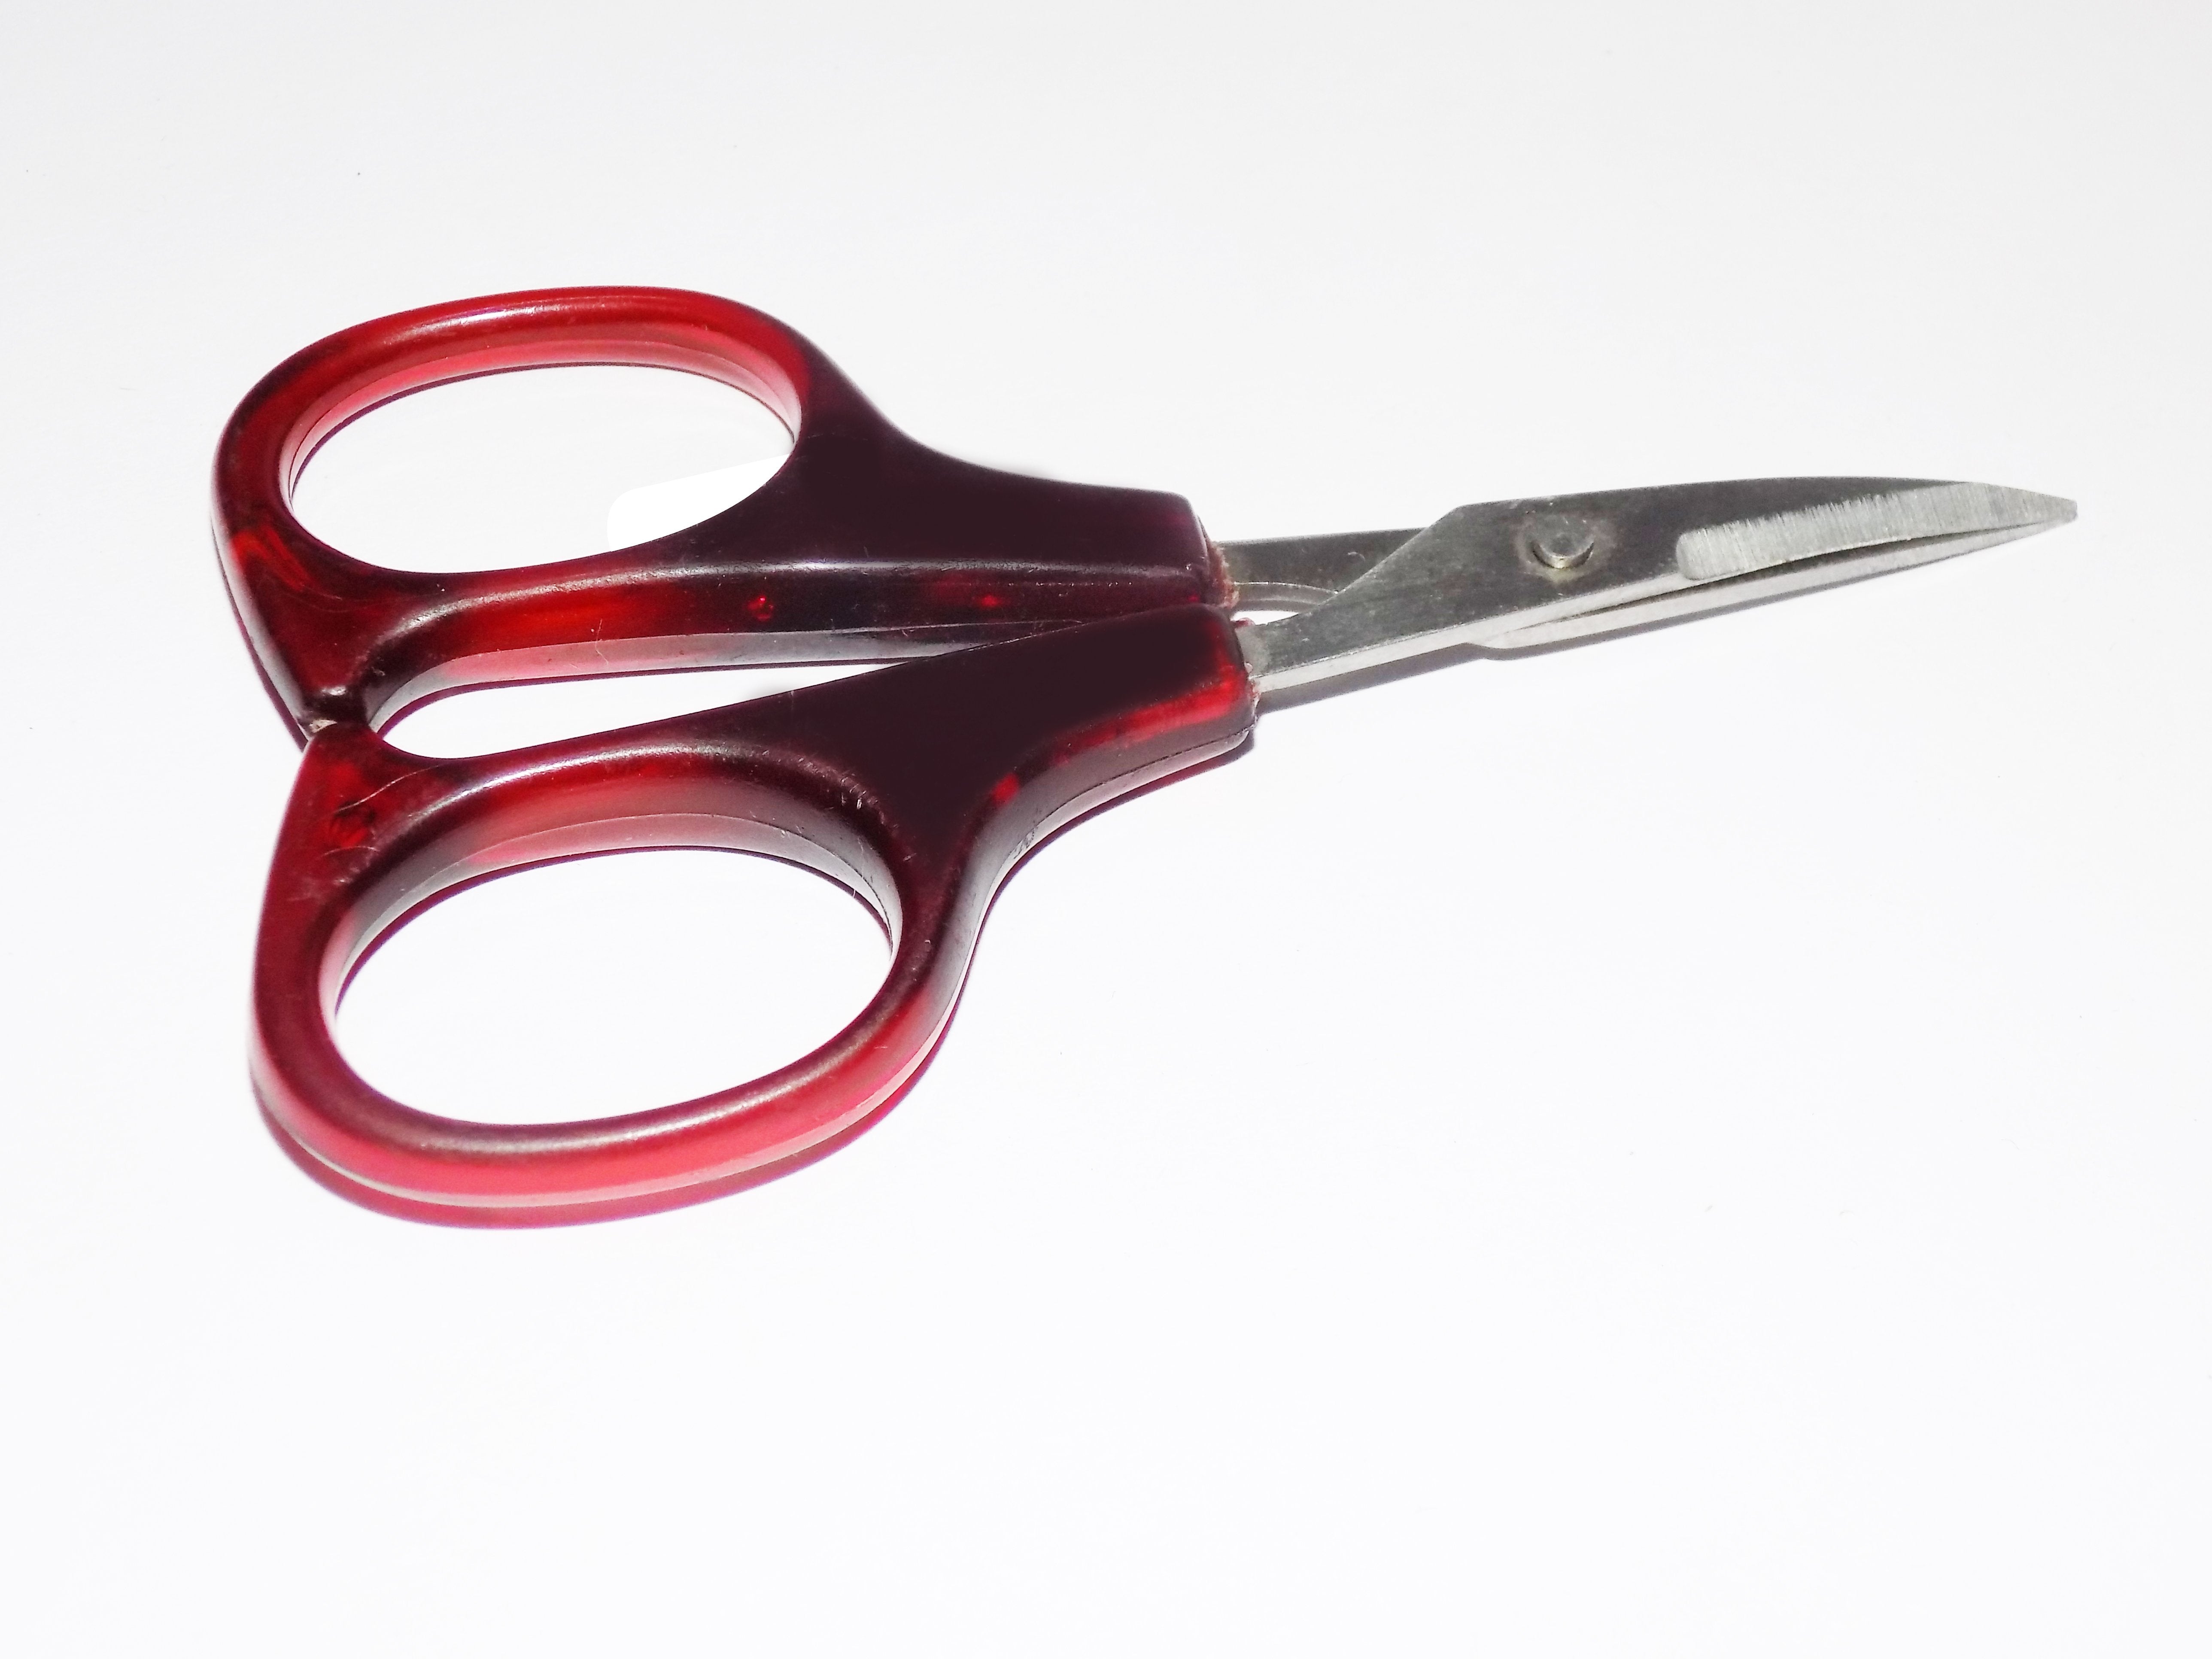 1572 Multipurpose Scissors for Kitchen Office and Craft Use - SkyShopy